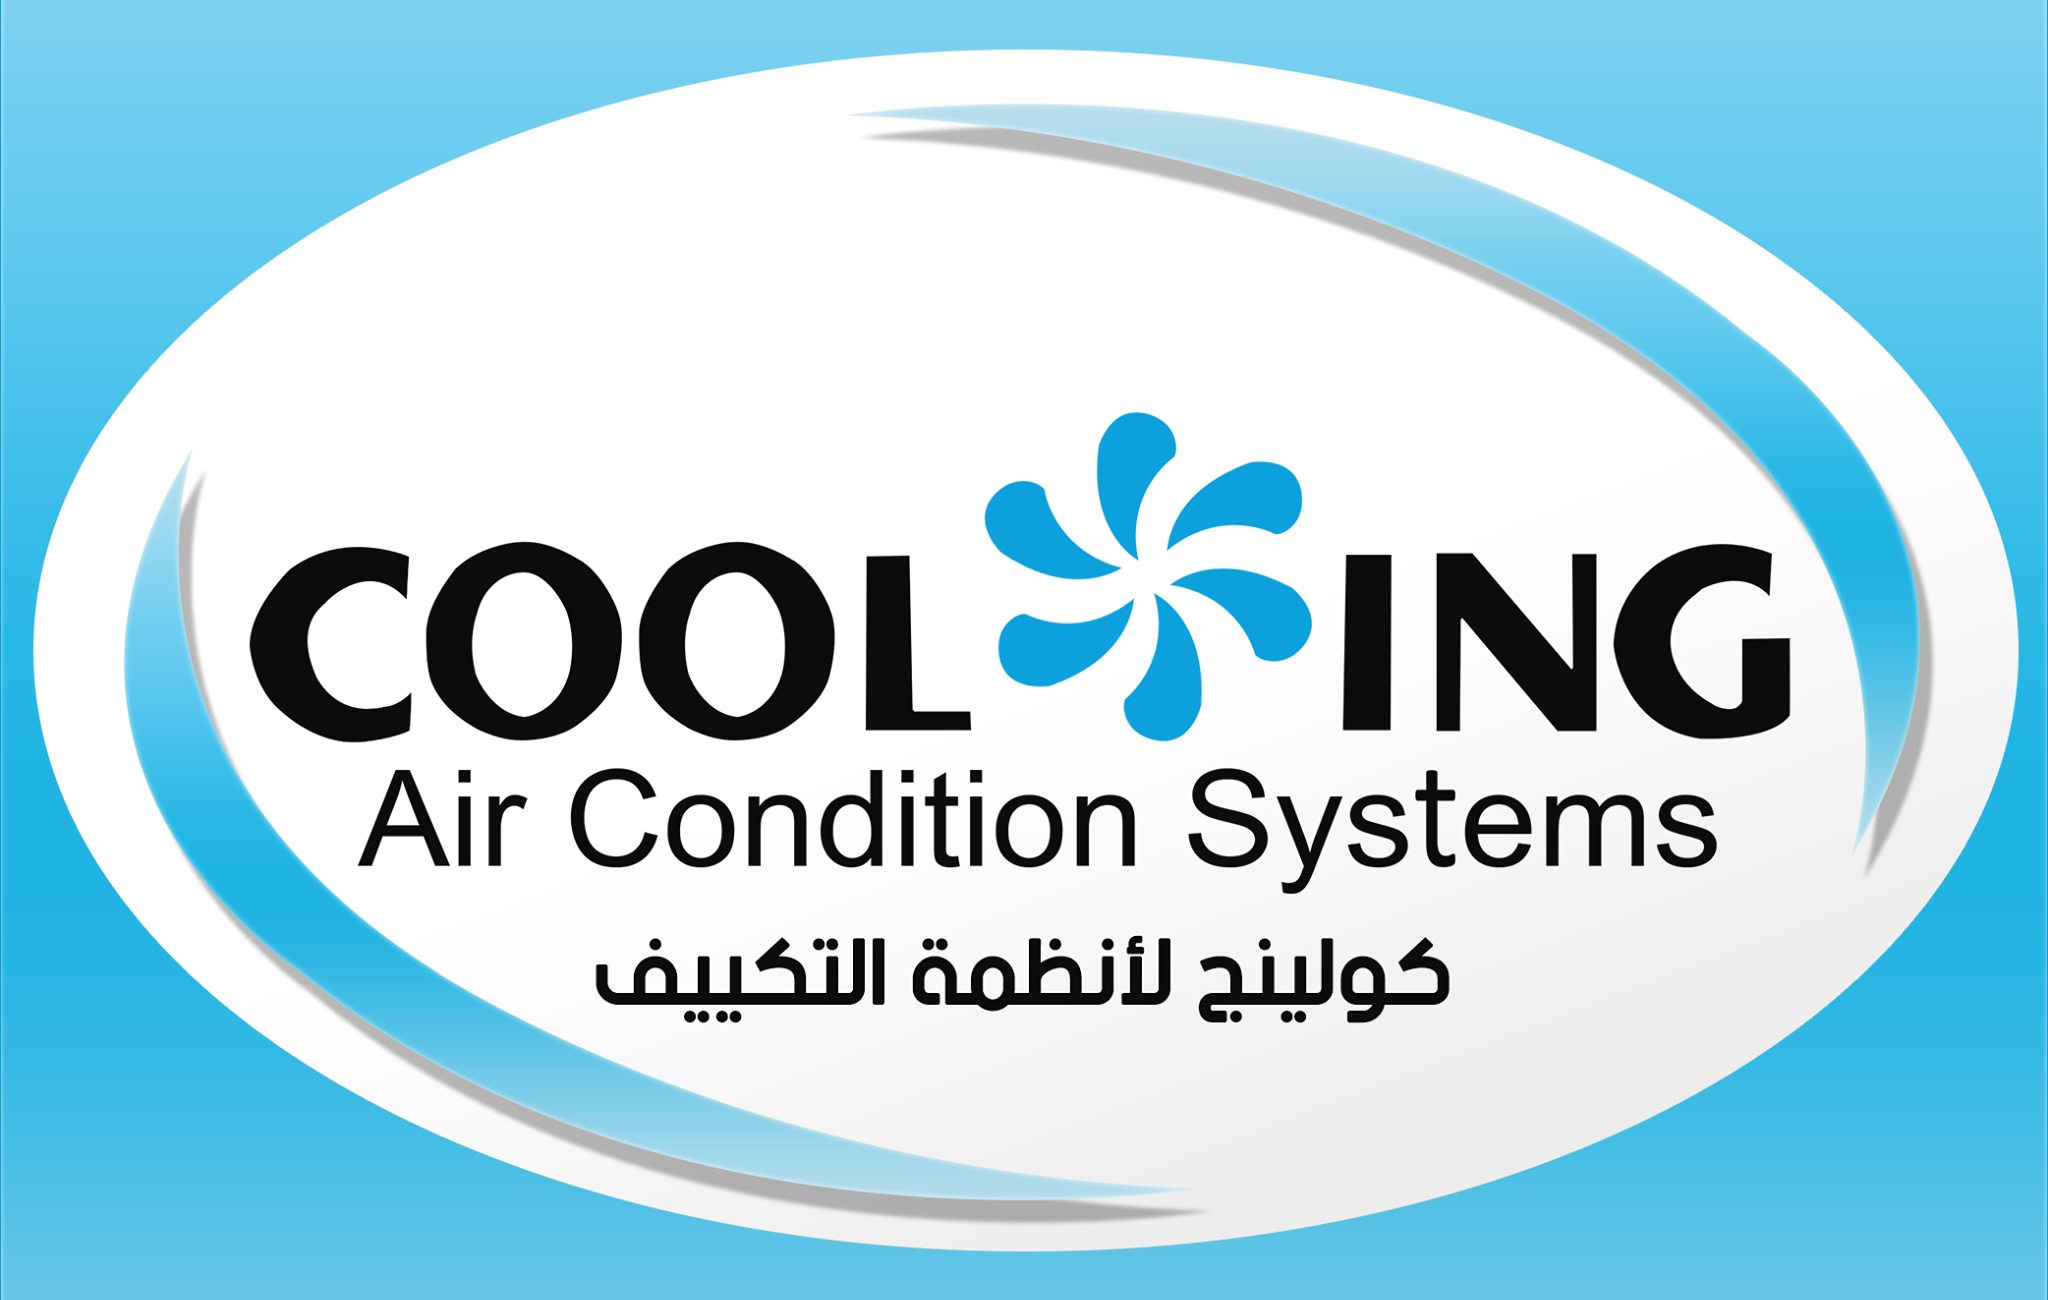 Cooling Air Condition Systems